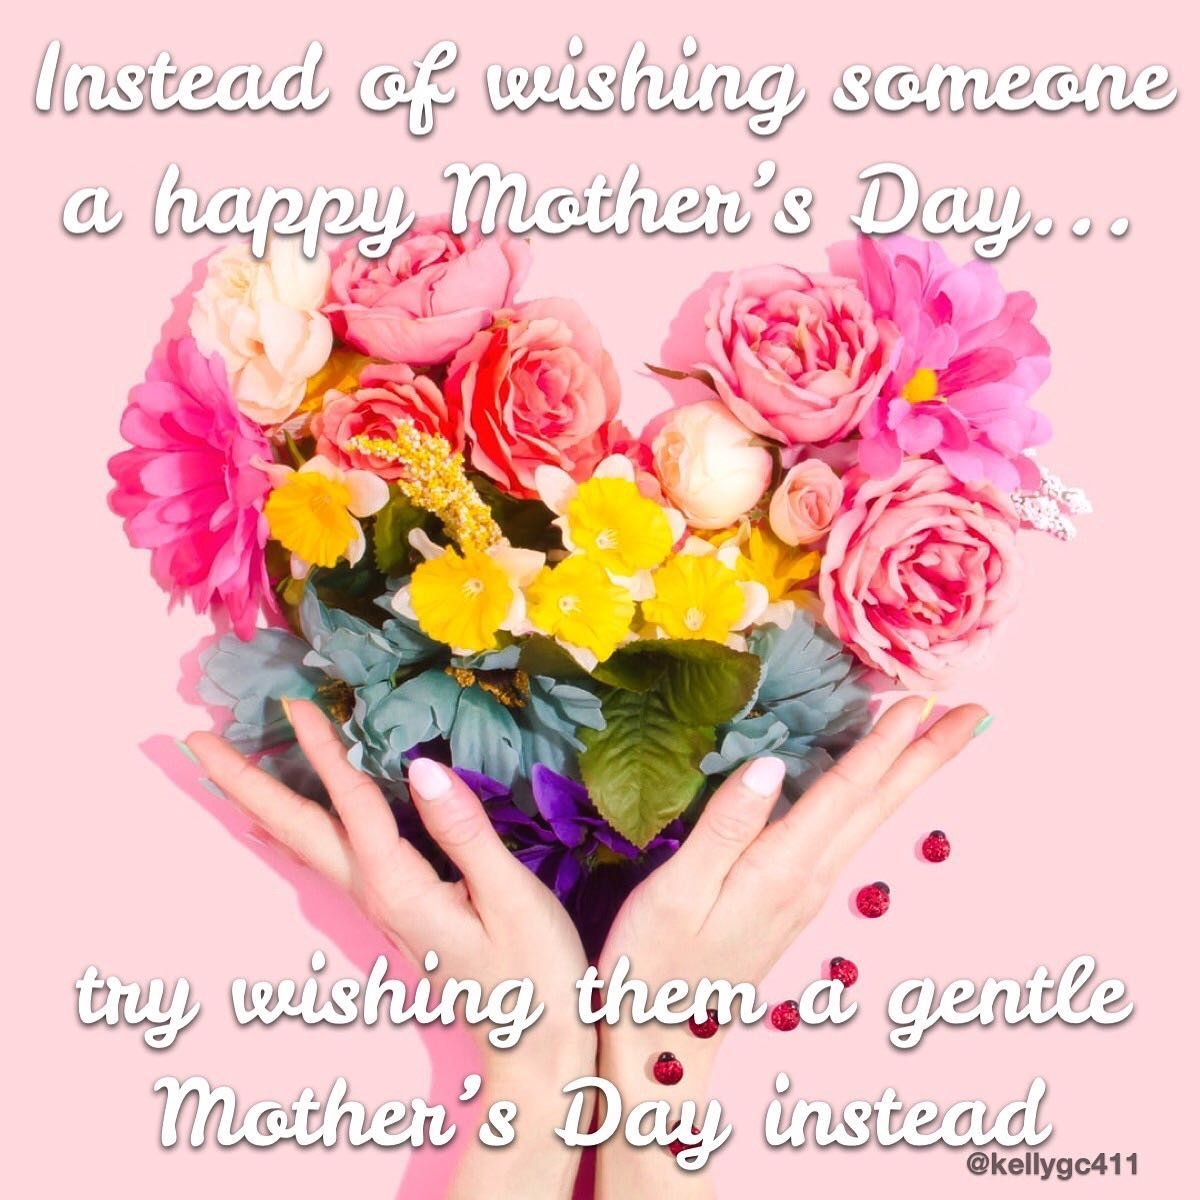 Wishing a gentle Mother&rsquo;s Day to those who miss their mothers and those who miss being mothers.

To those who grew babies in their womb and those who helped them grow in the years that followed.

To those that are grieving what was and those th